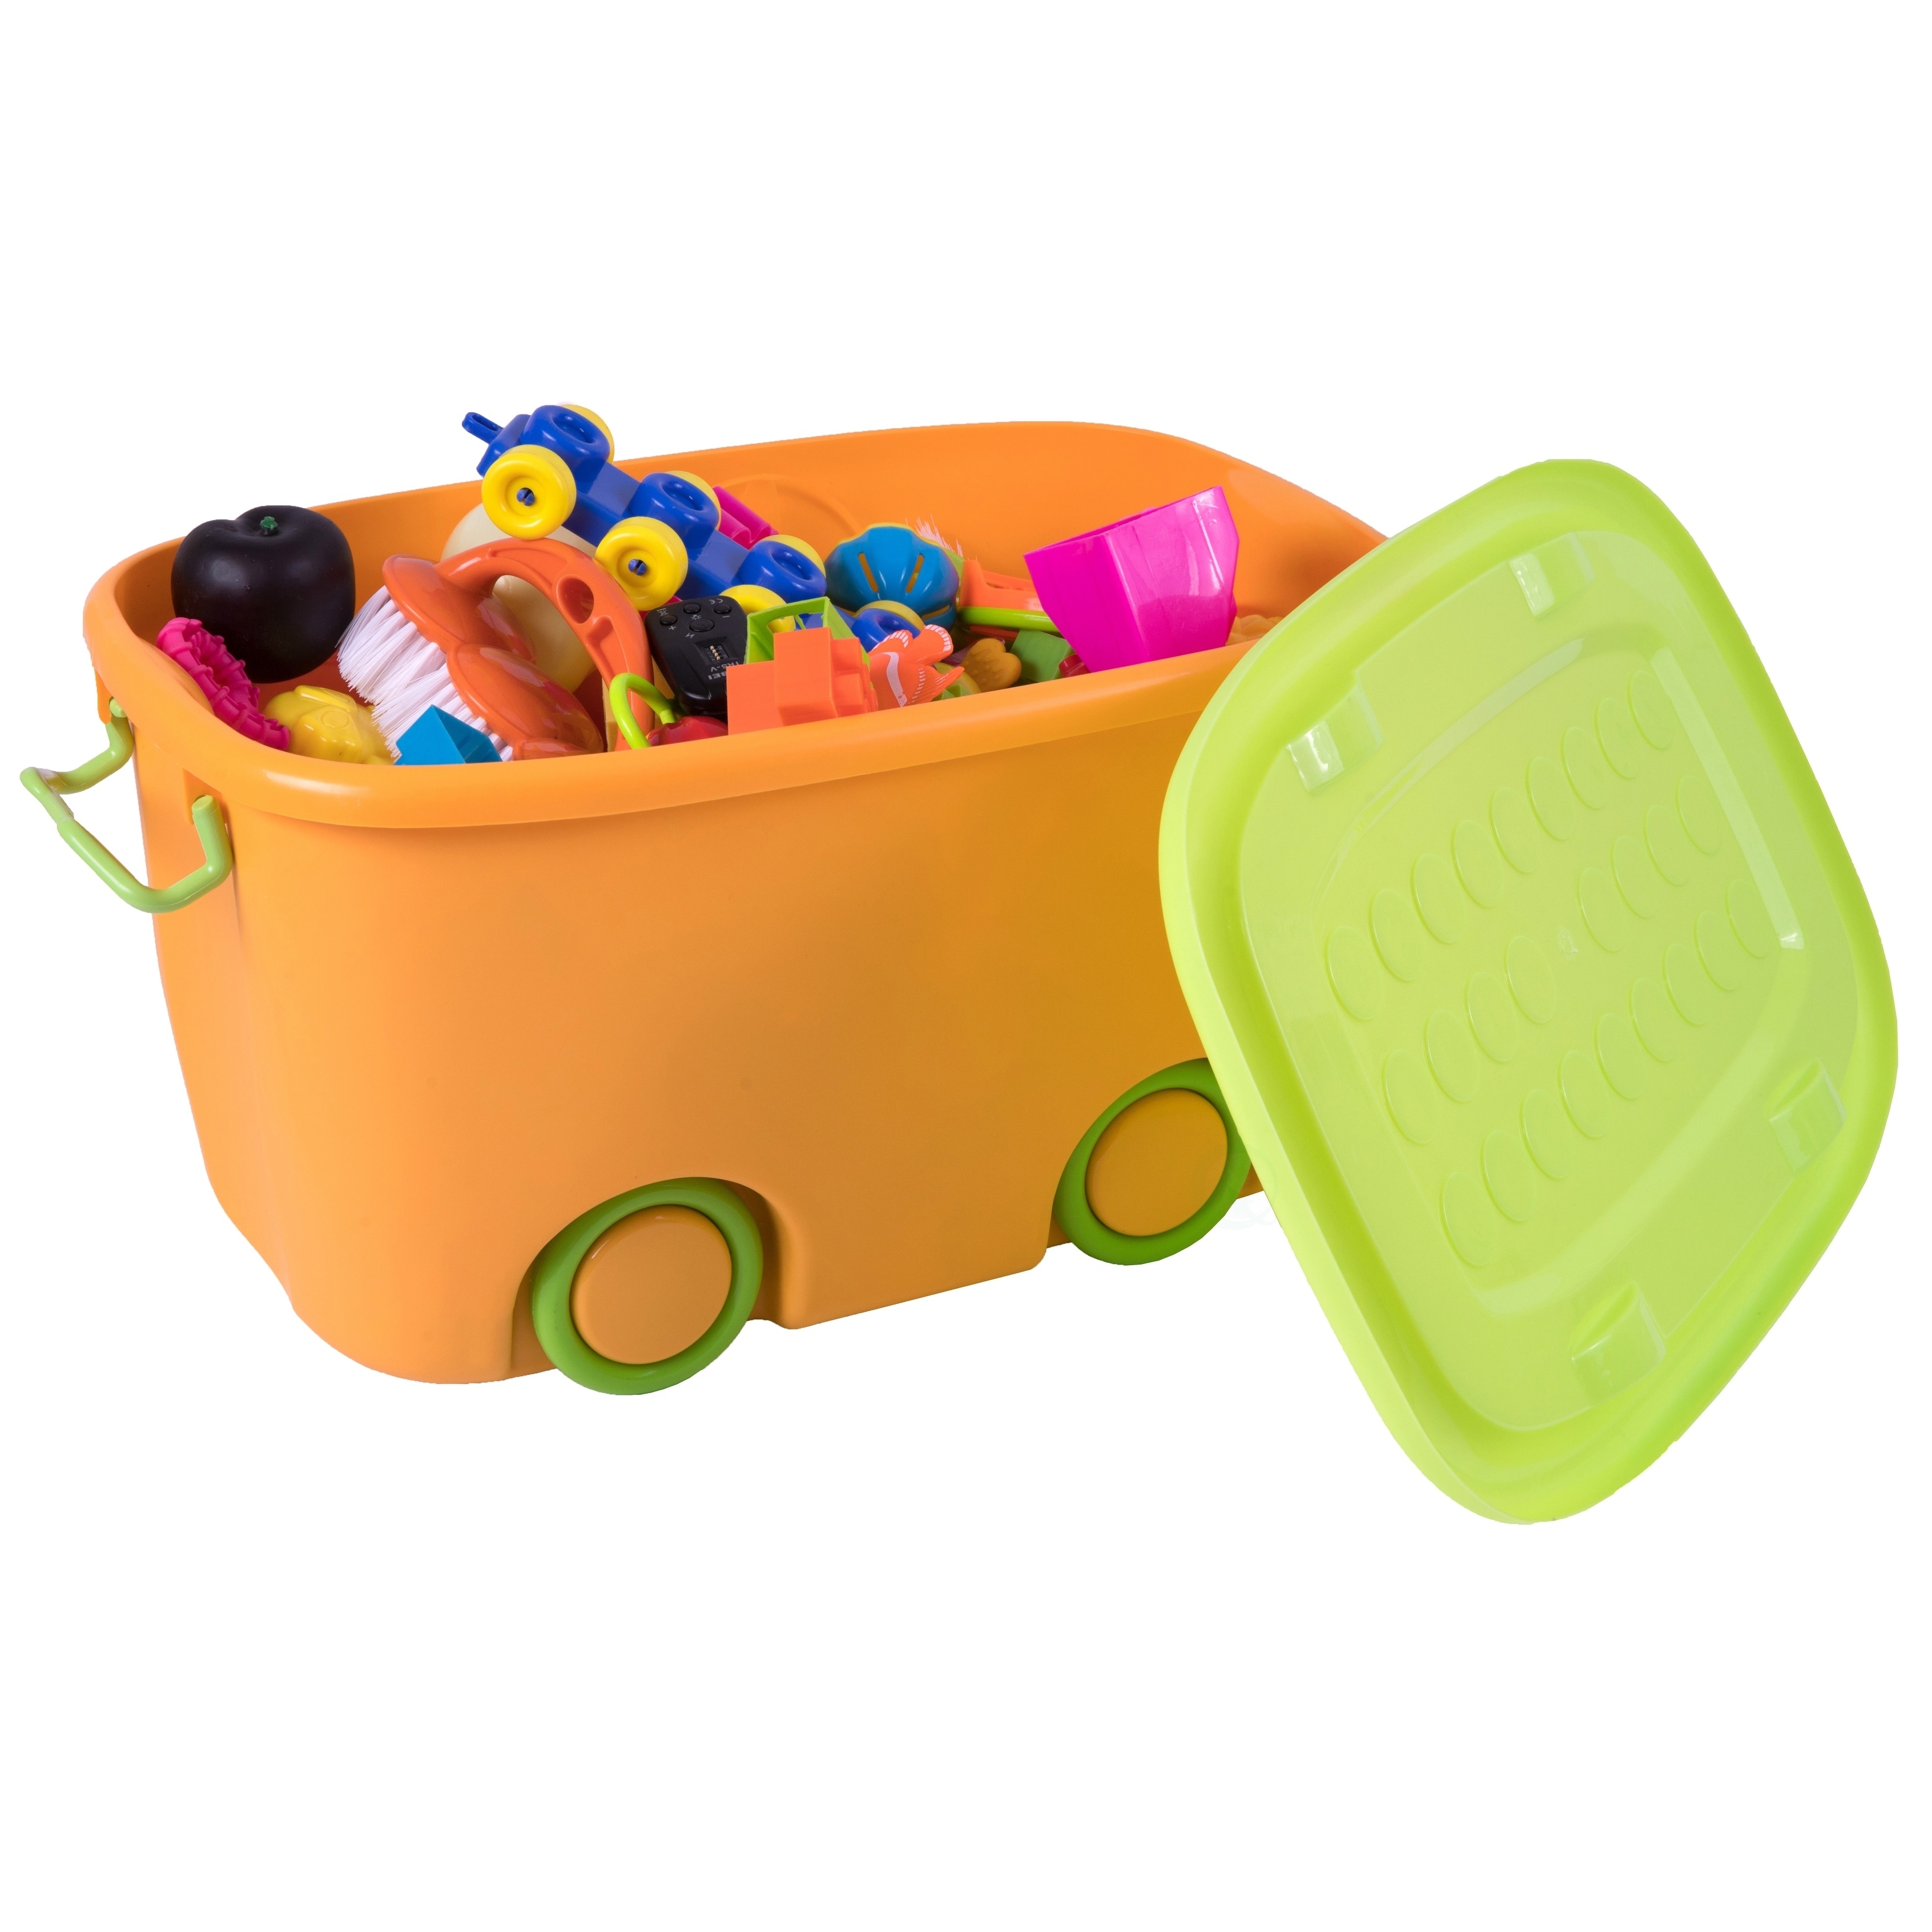 wooden toy box with wheels